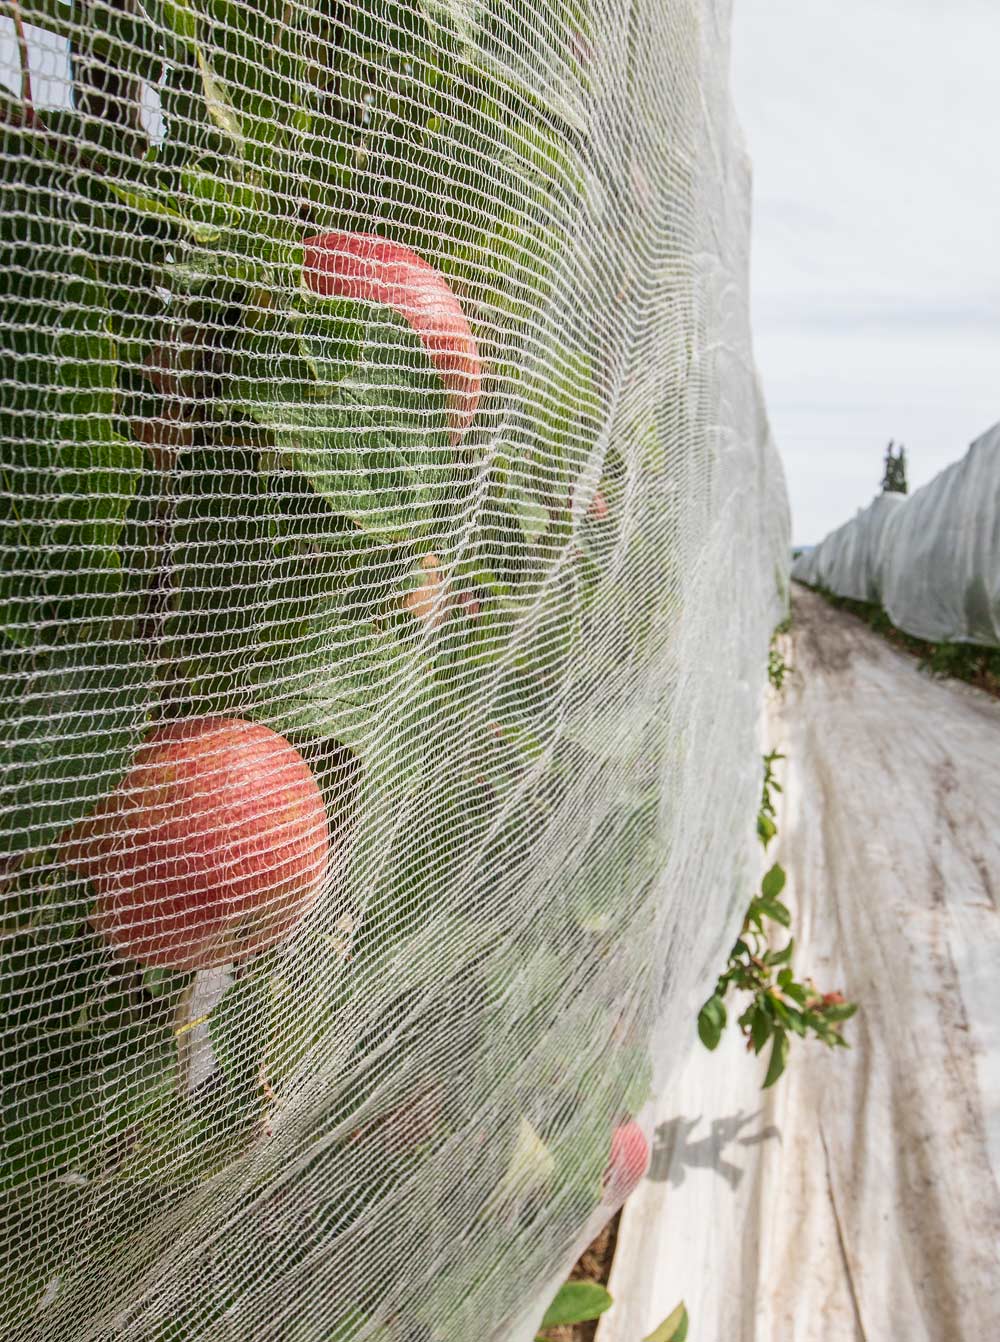 A demonstration of Drape Net netting fully covering this row of Envy apples during the 2018 International Fruit Tree Association New Zealand Study Tour on February 19, 2018. (TJ Mullinax/Good Fruit Grower)